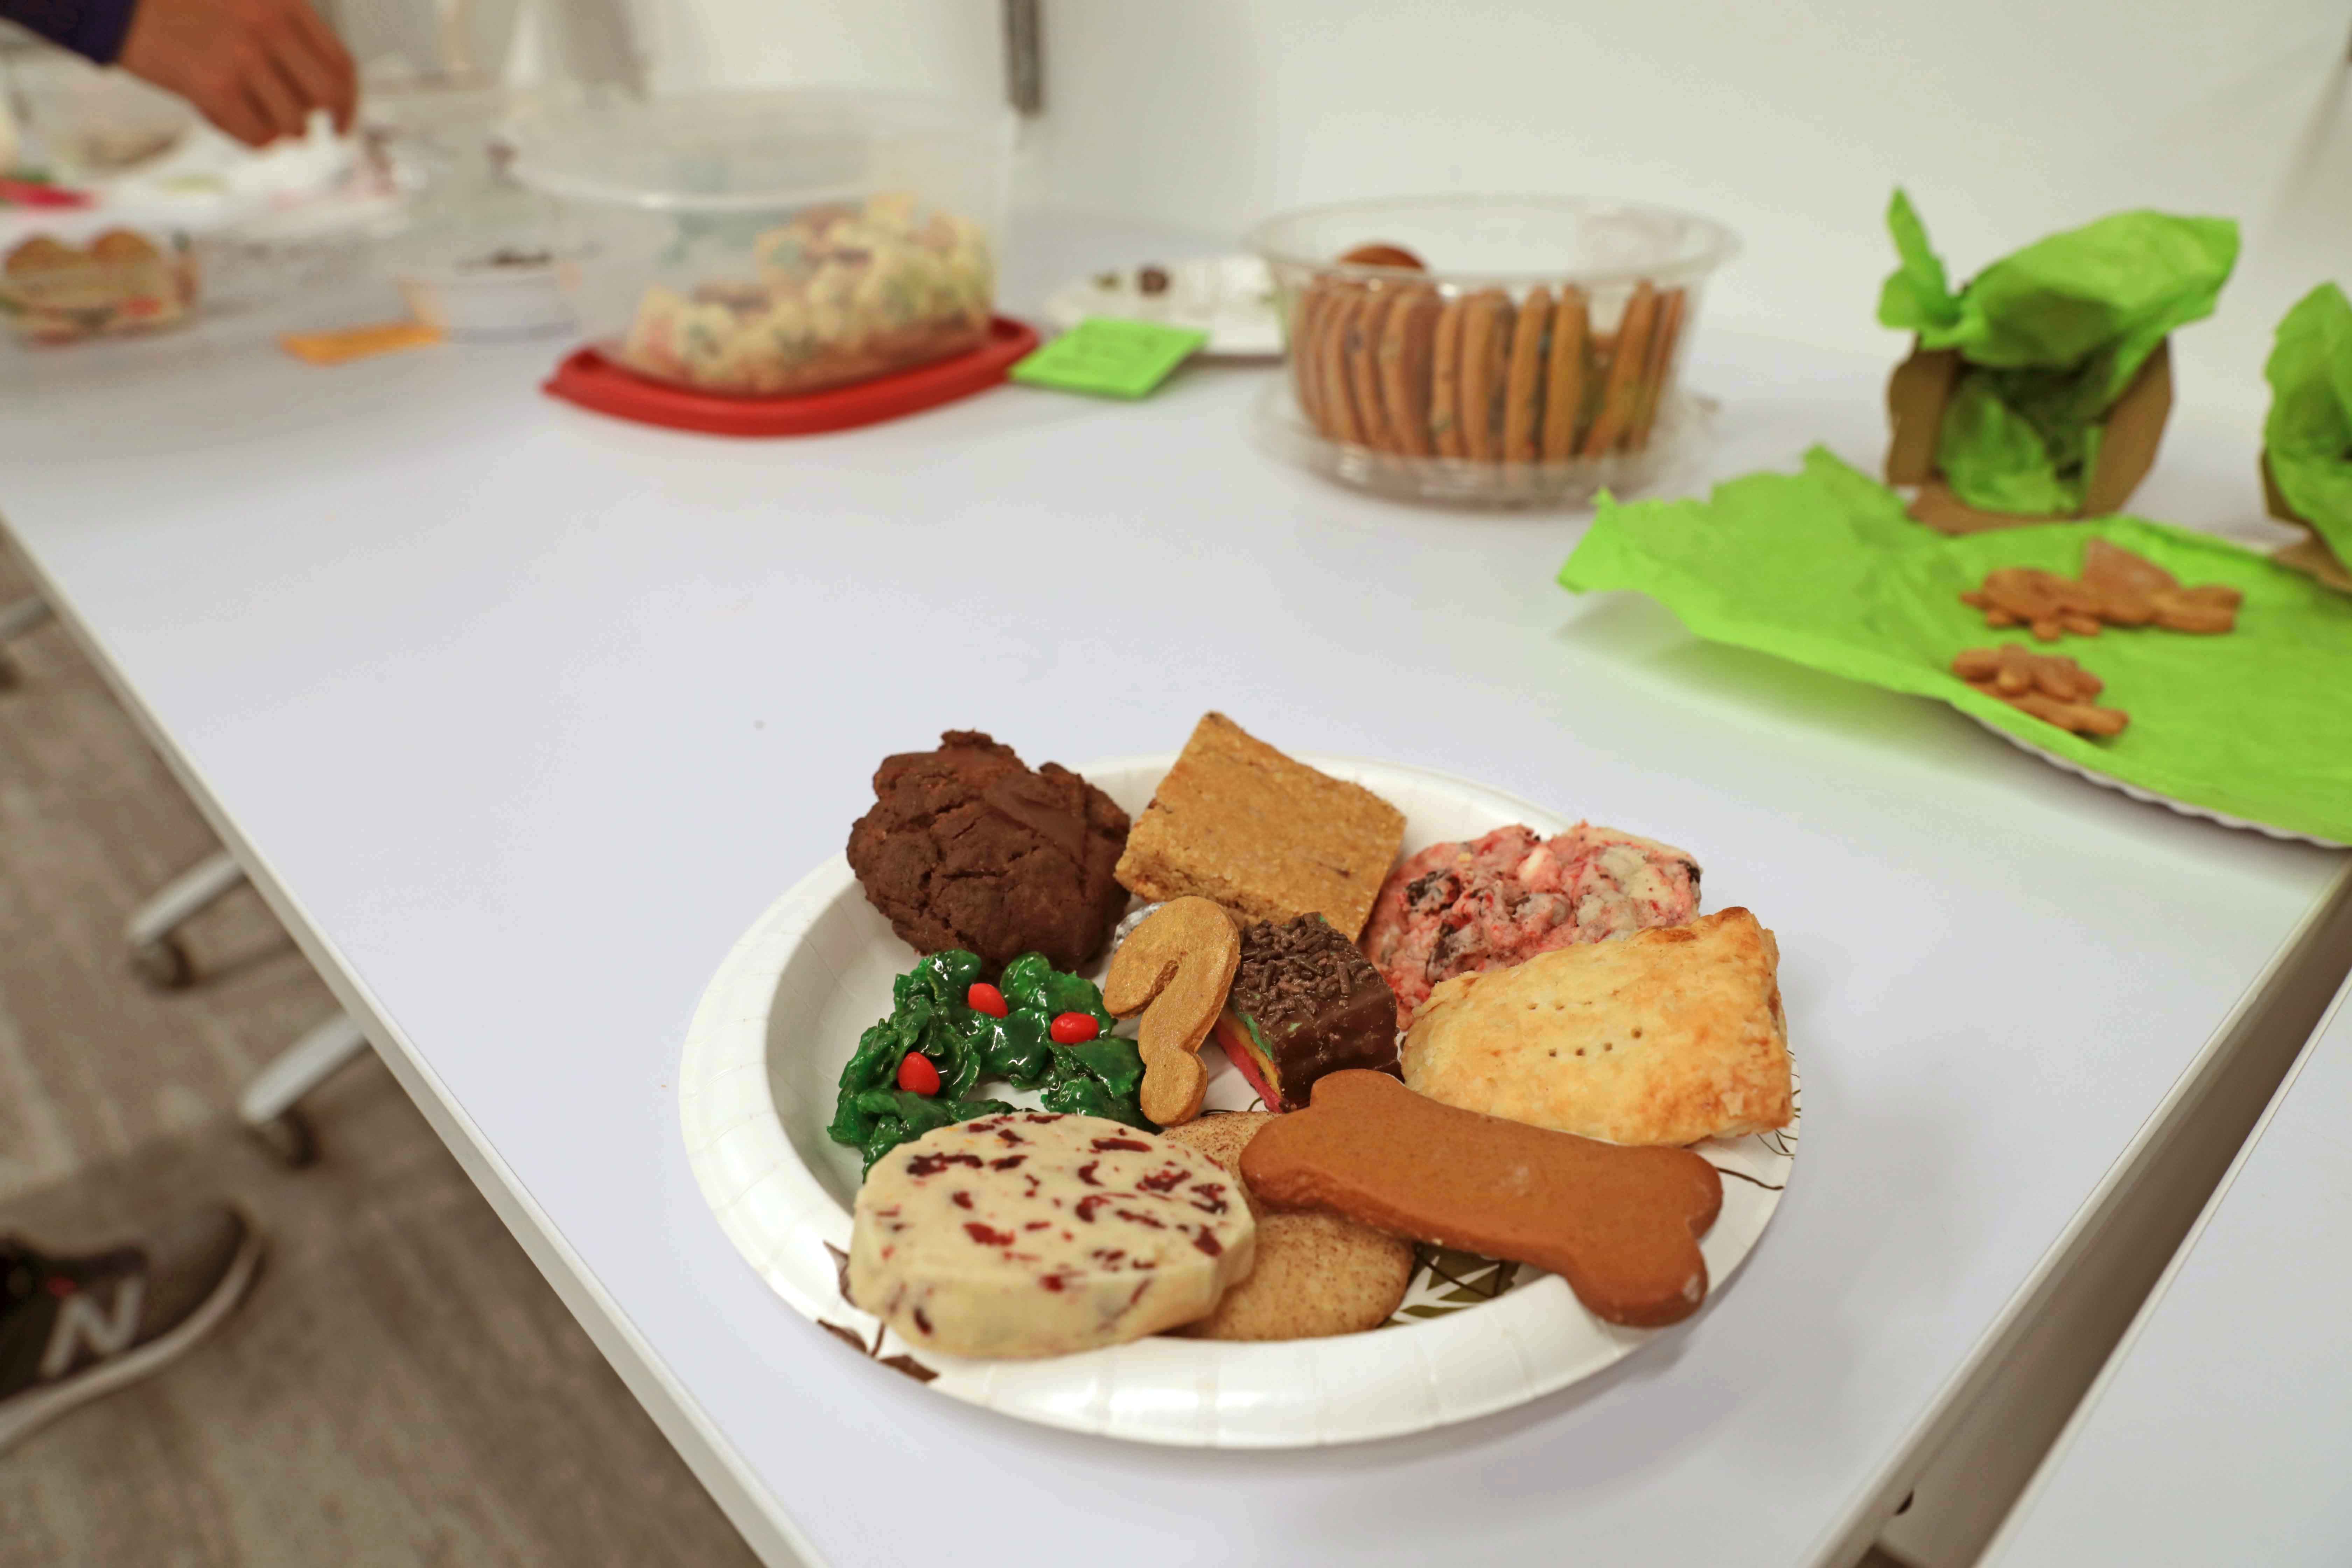 A plate of cookies on a table, with containers of cookies in the background